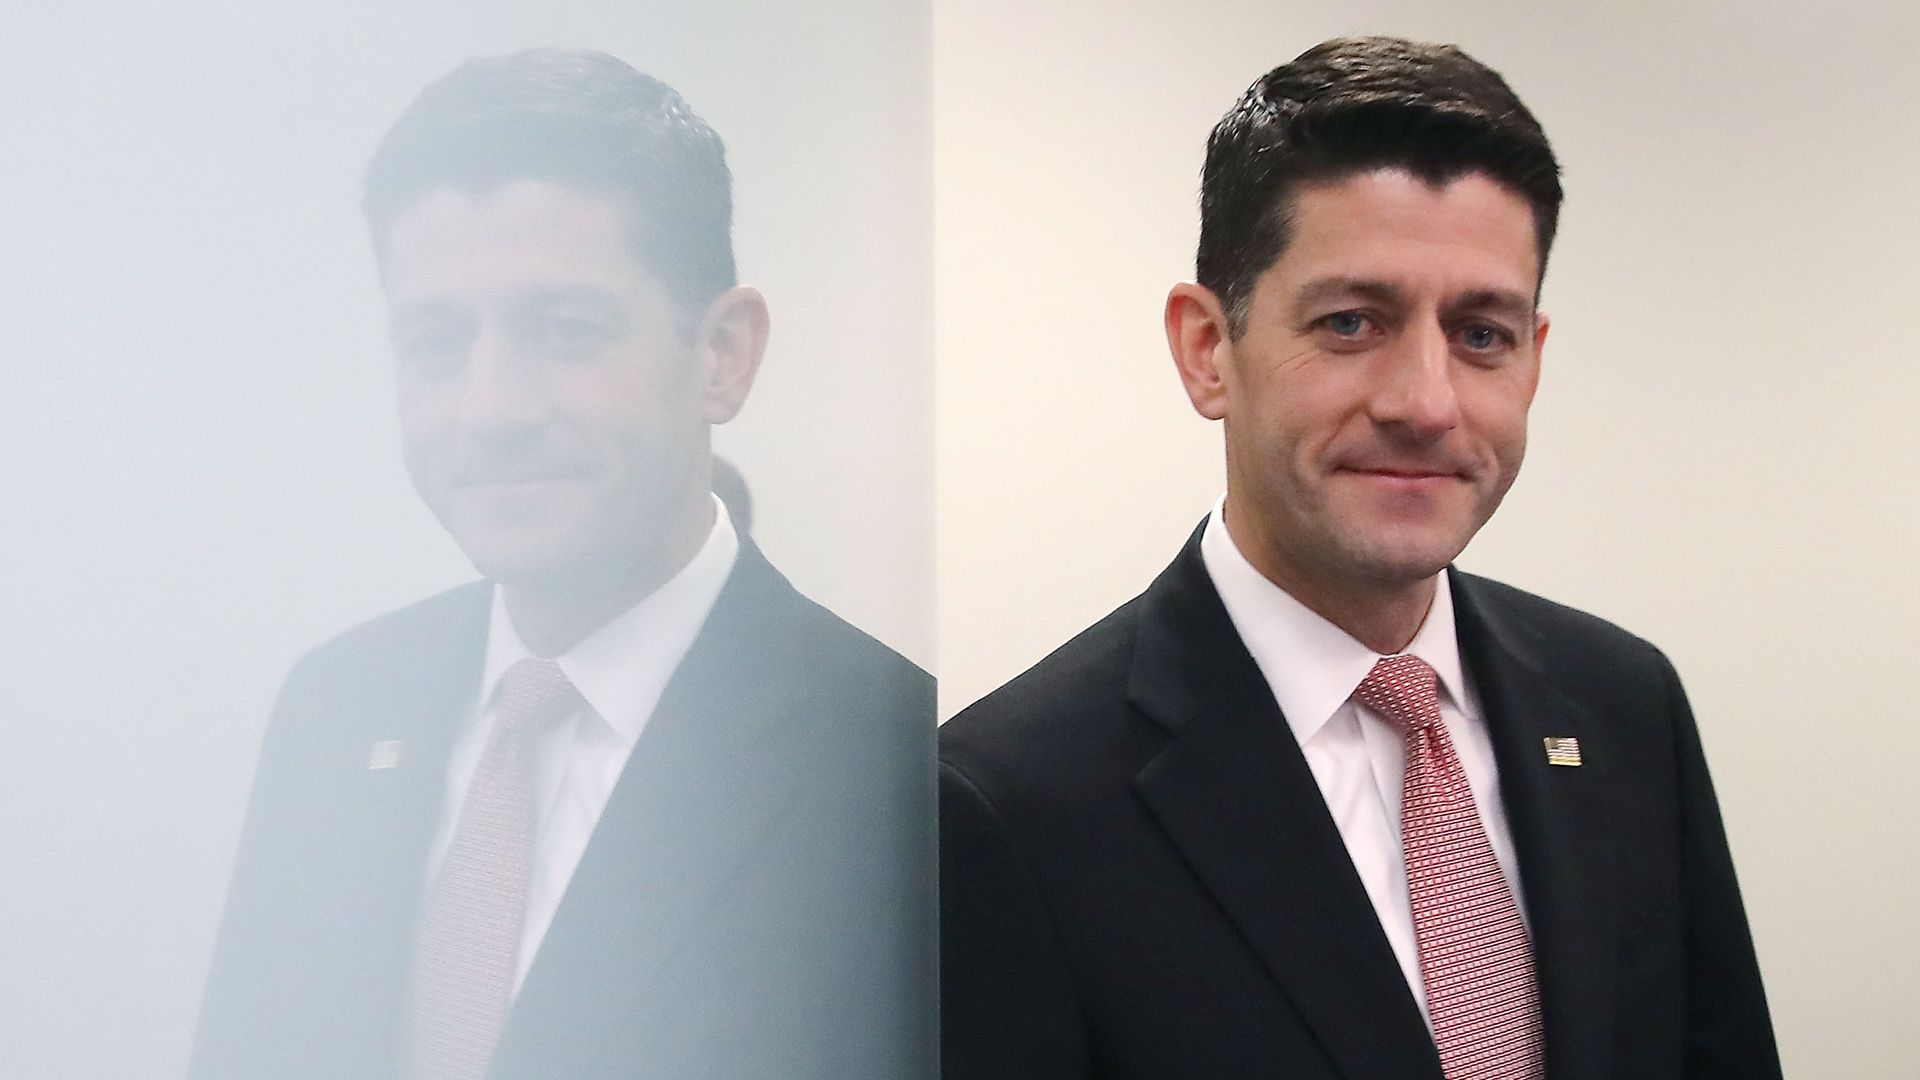 In this image, Paul Ryan leans against a reflective white wall while wearing a suit and red tie. 